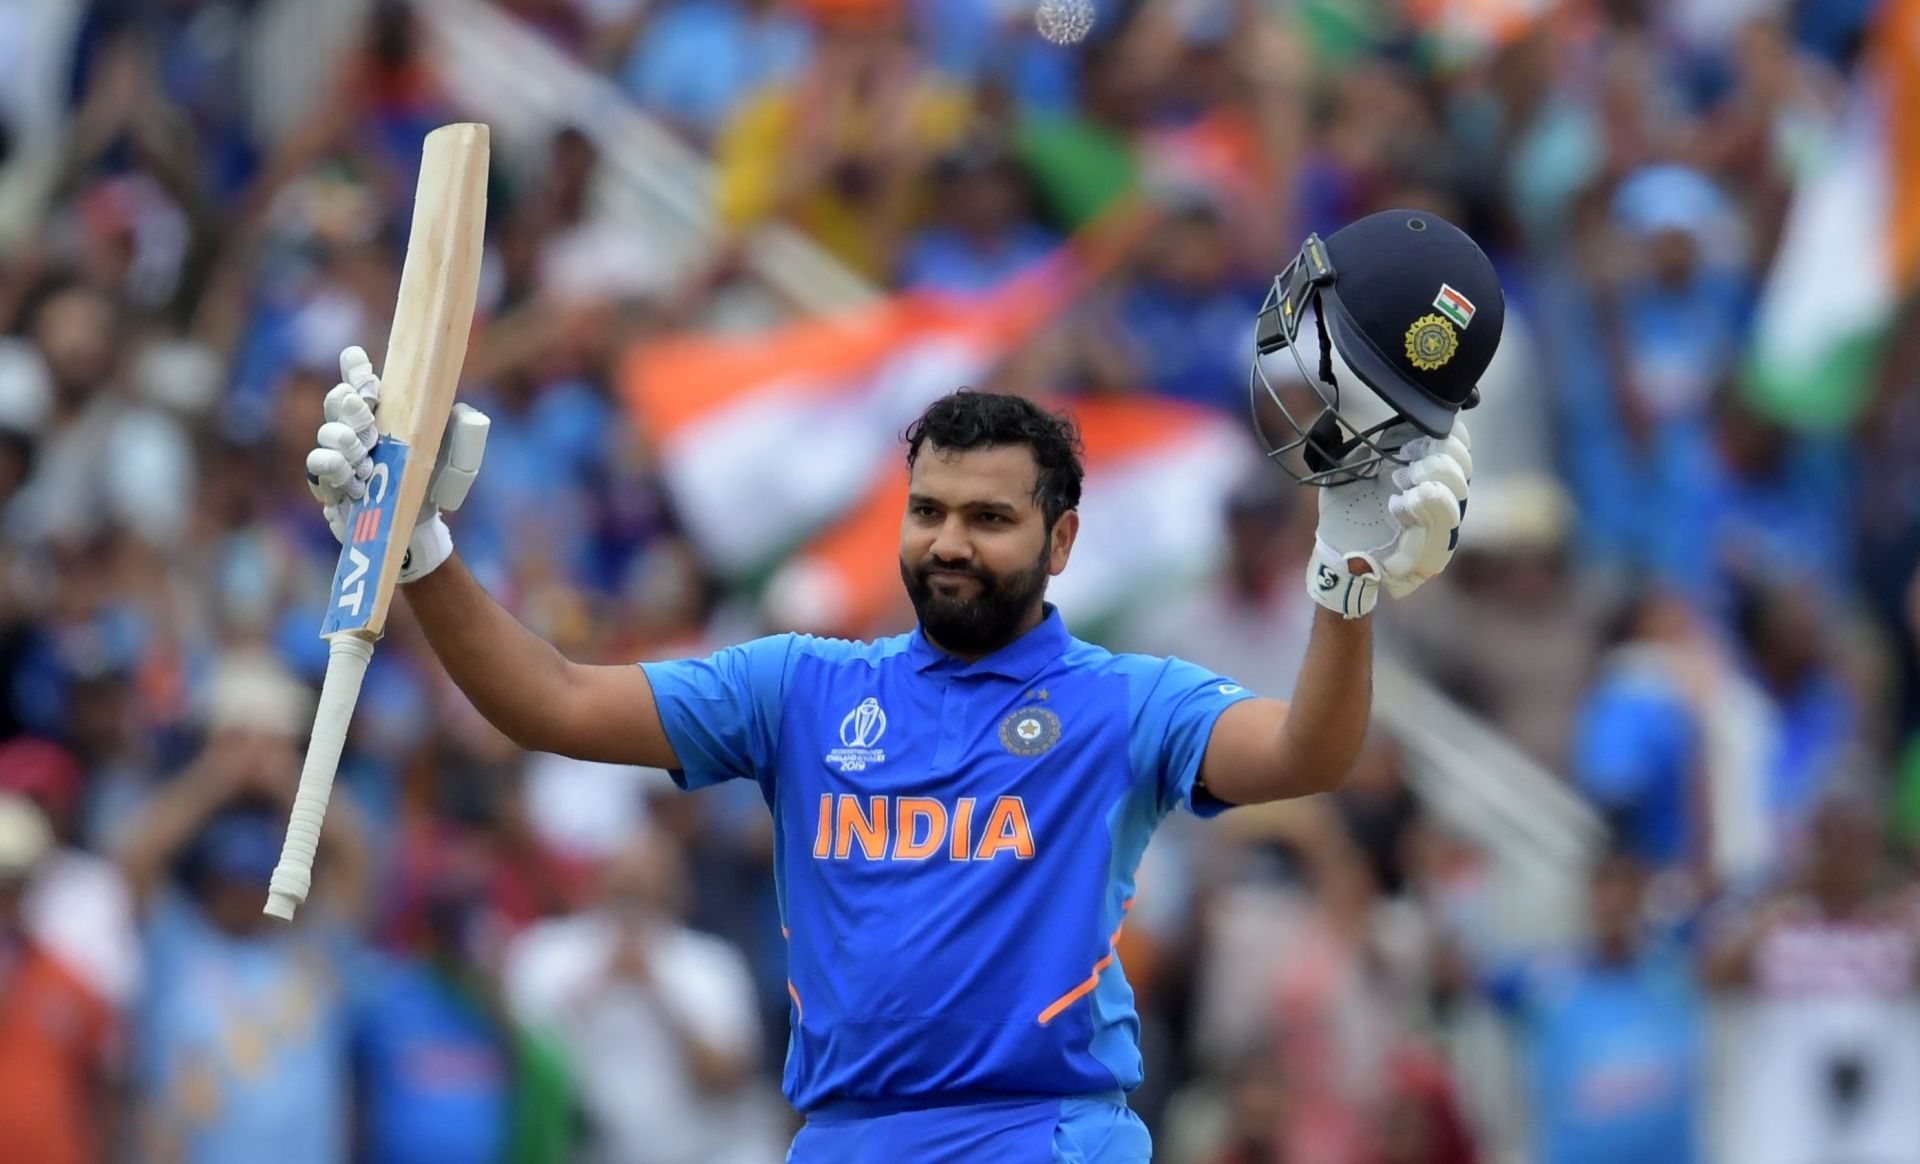 Rohit Sharma will be leading India in the Asia Cup (Image Courtesy: ICC Cricket)